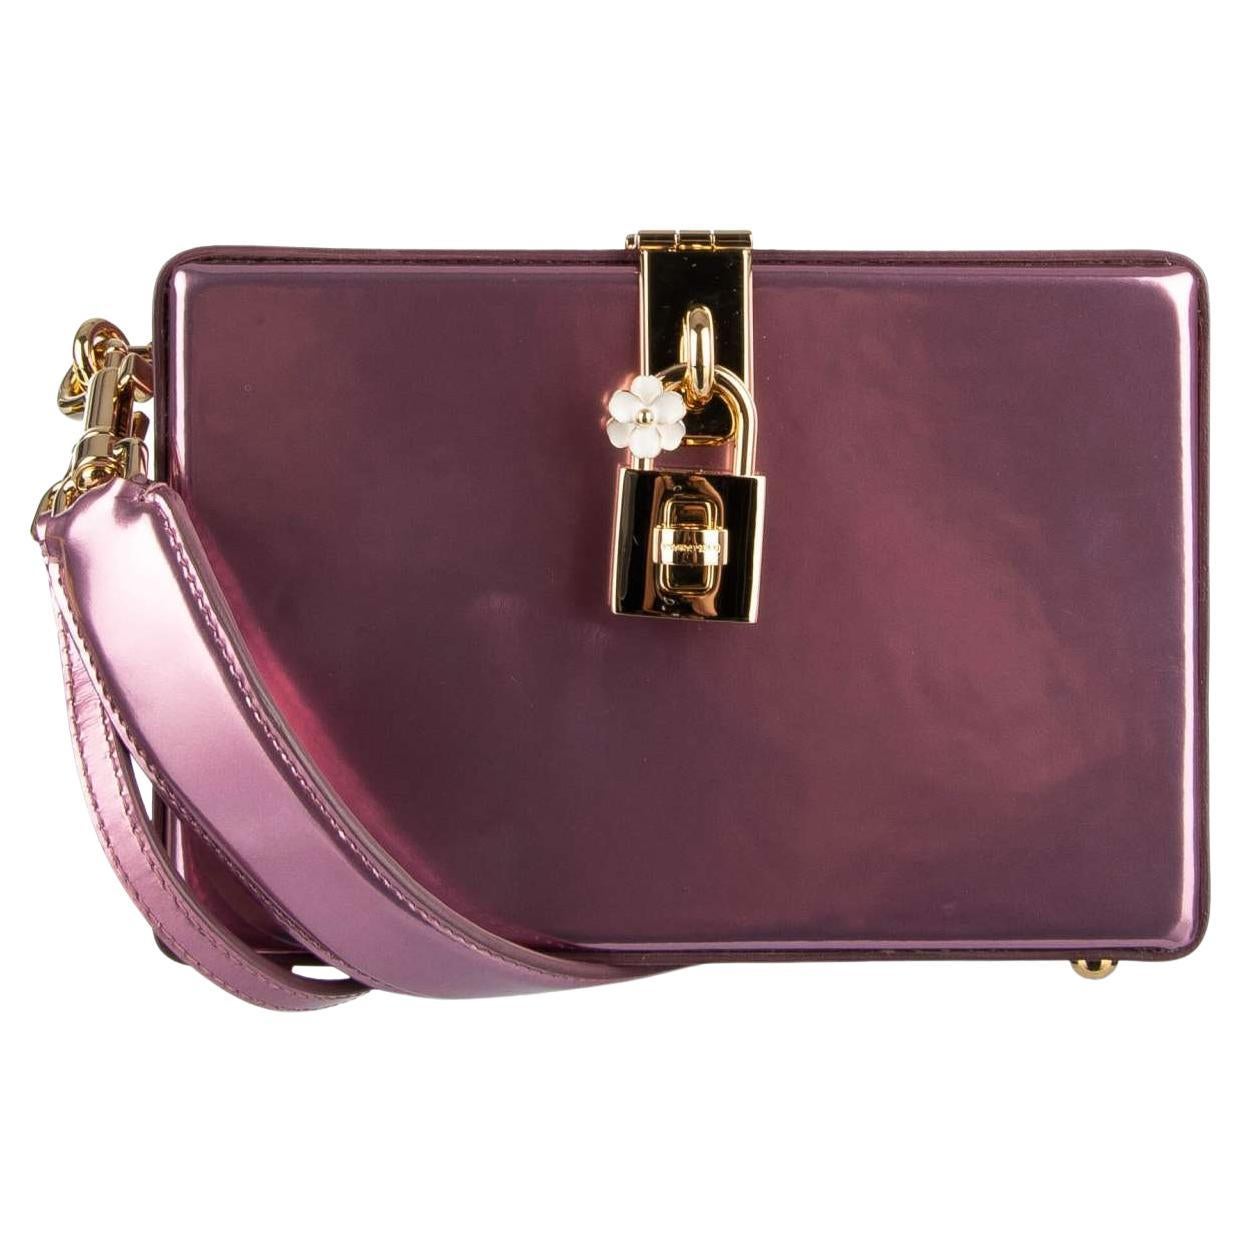 Dolce & Gabbana - Laminated Metallic Leather Bag DOLCE BOX Rose Pink For Sale